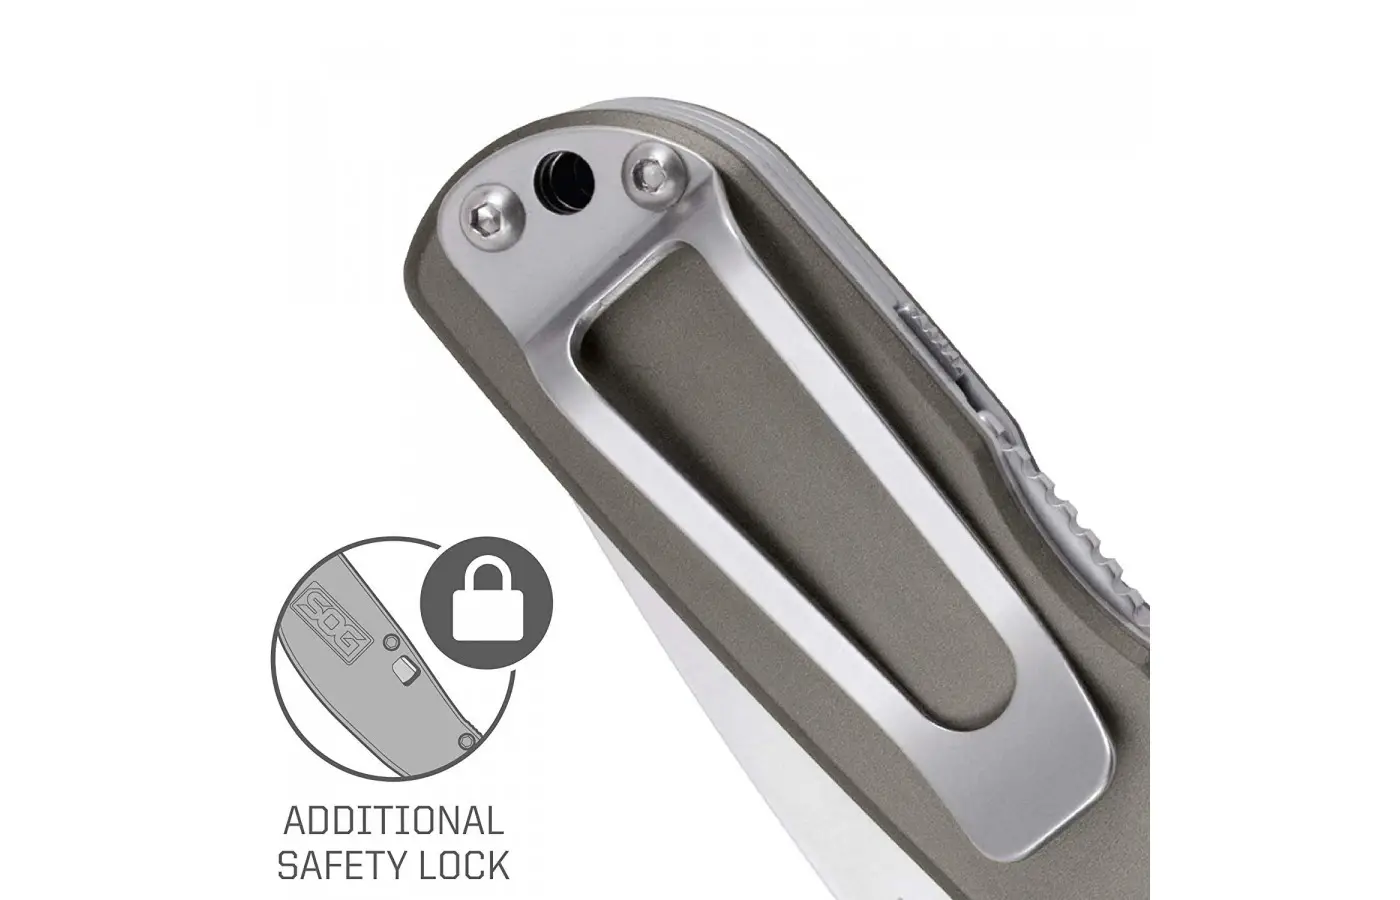 Once the knife is open, it is locked into position with an additional safety lock to avoid accidental closure during use. 